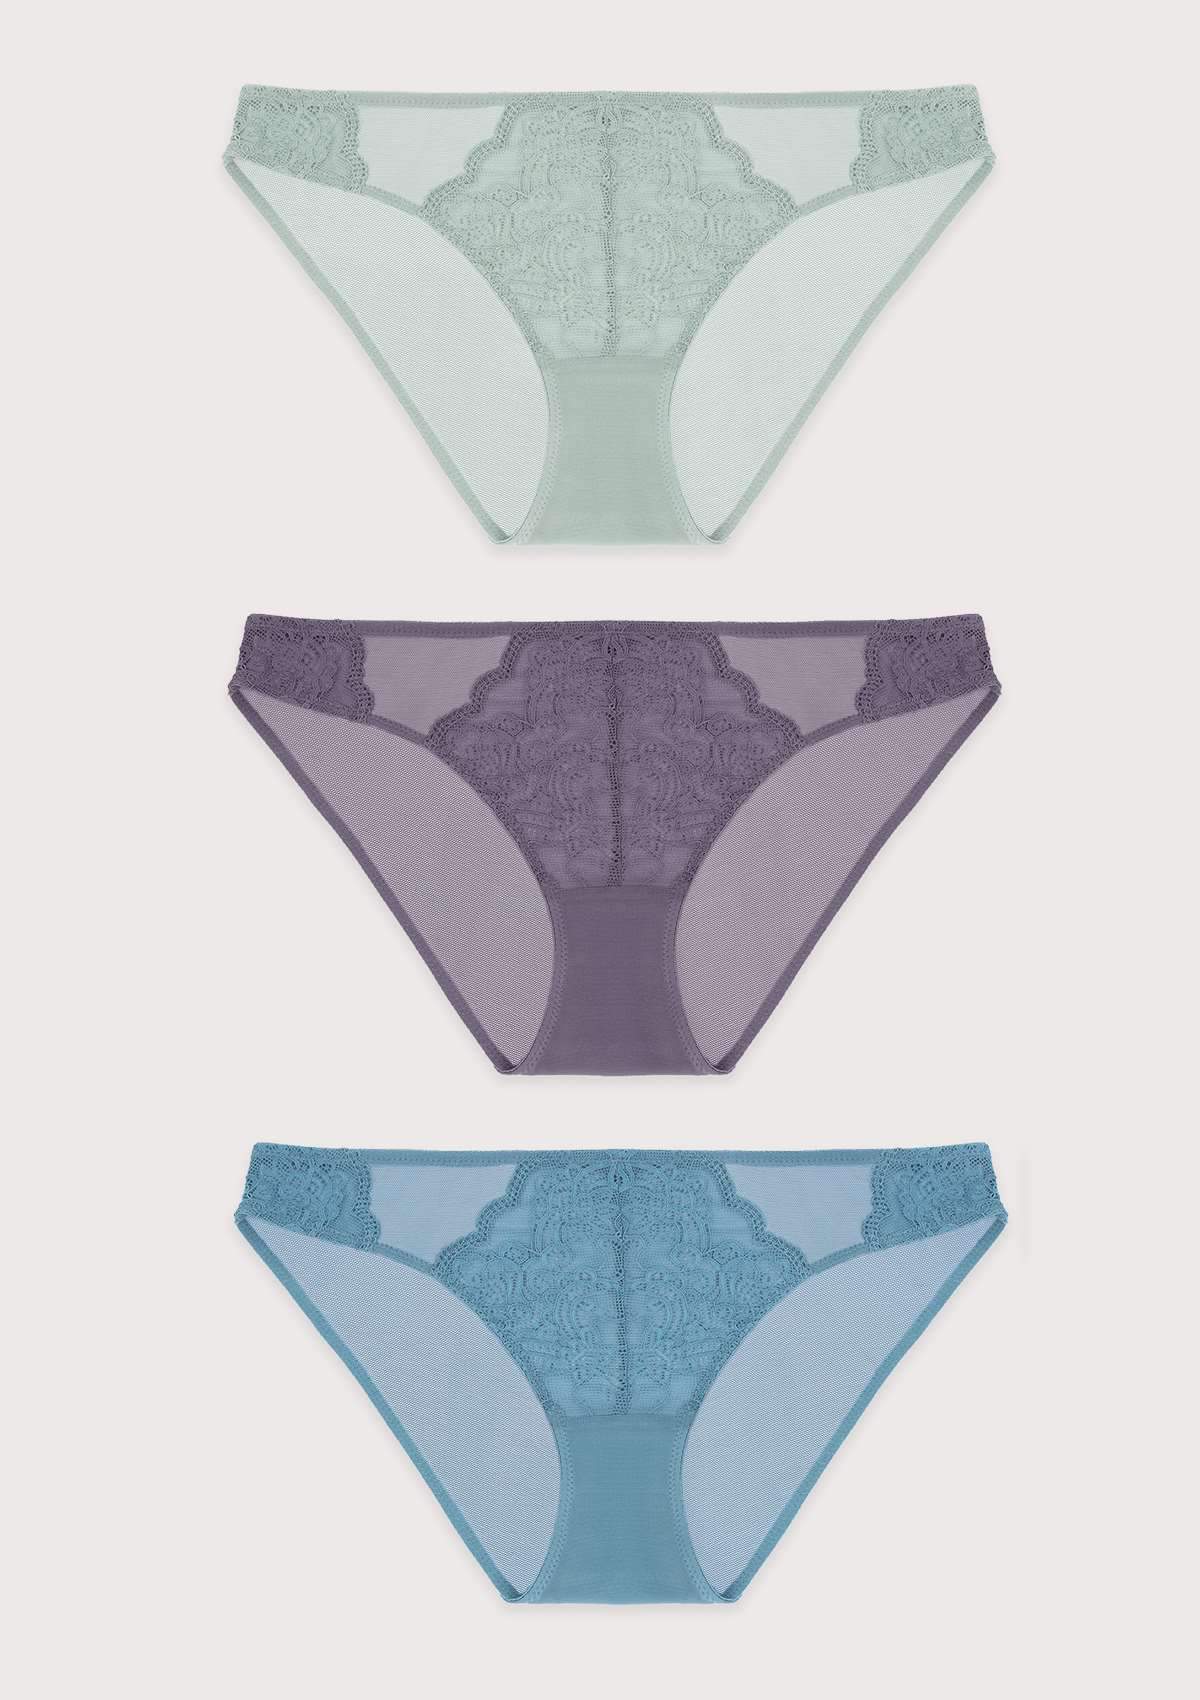 HSIA Floral Lace Front And Sheer Mesh Back Airy Bikini Panties -3 Pack - XXL / Green+Purple+Blue